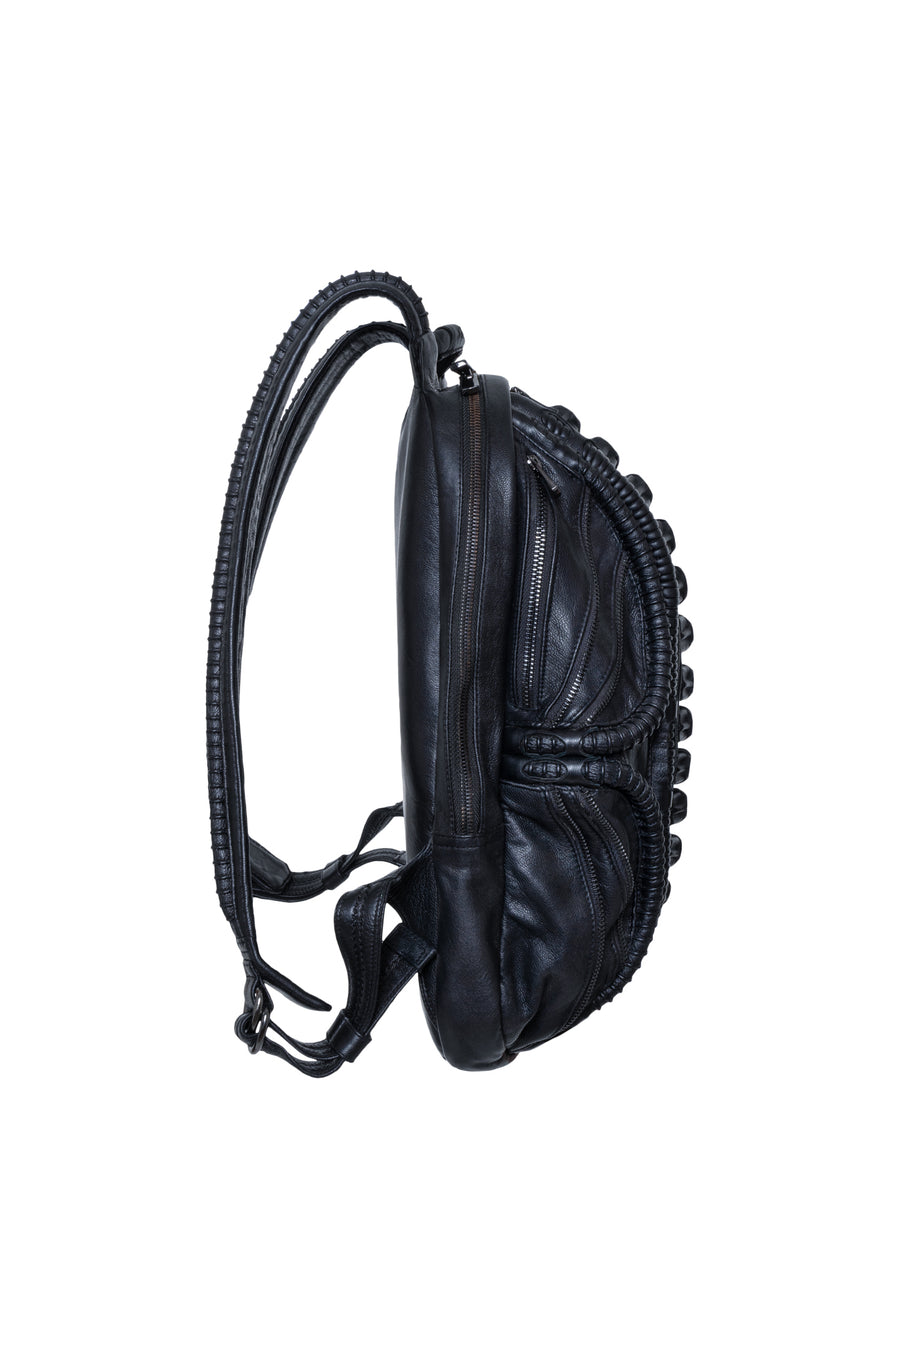 Avant-garde leather laptop backpack with biomorphic spine design in dark post-apocalyptic fashion